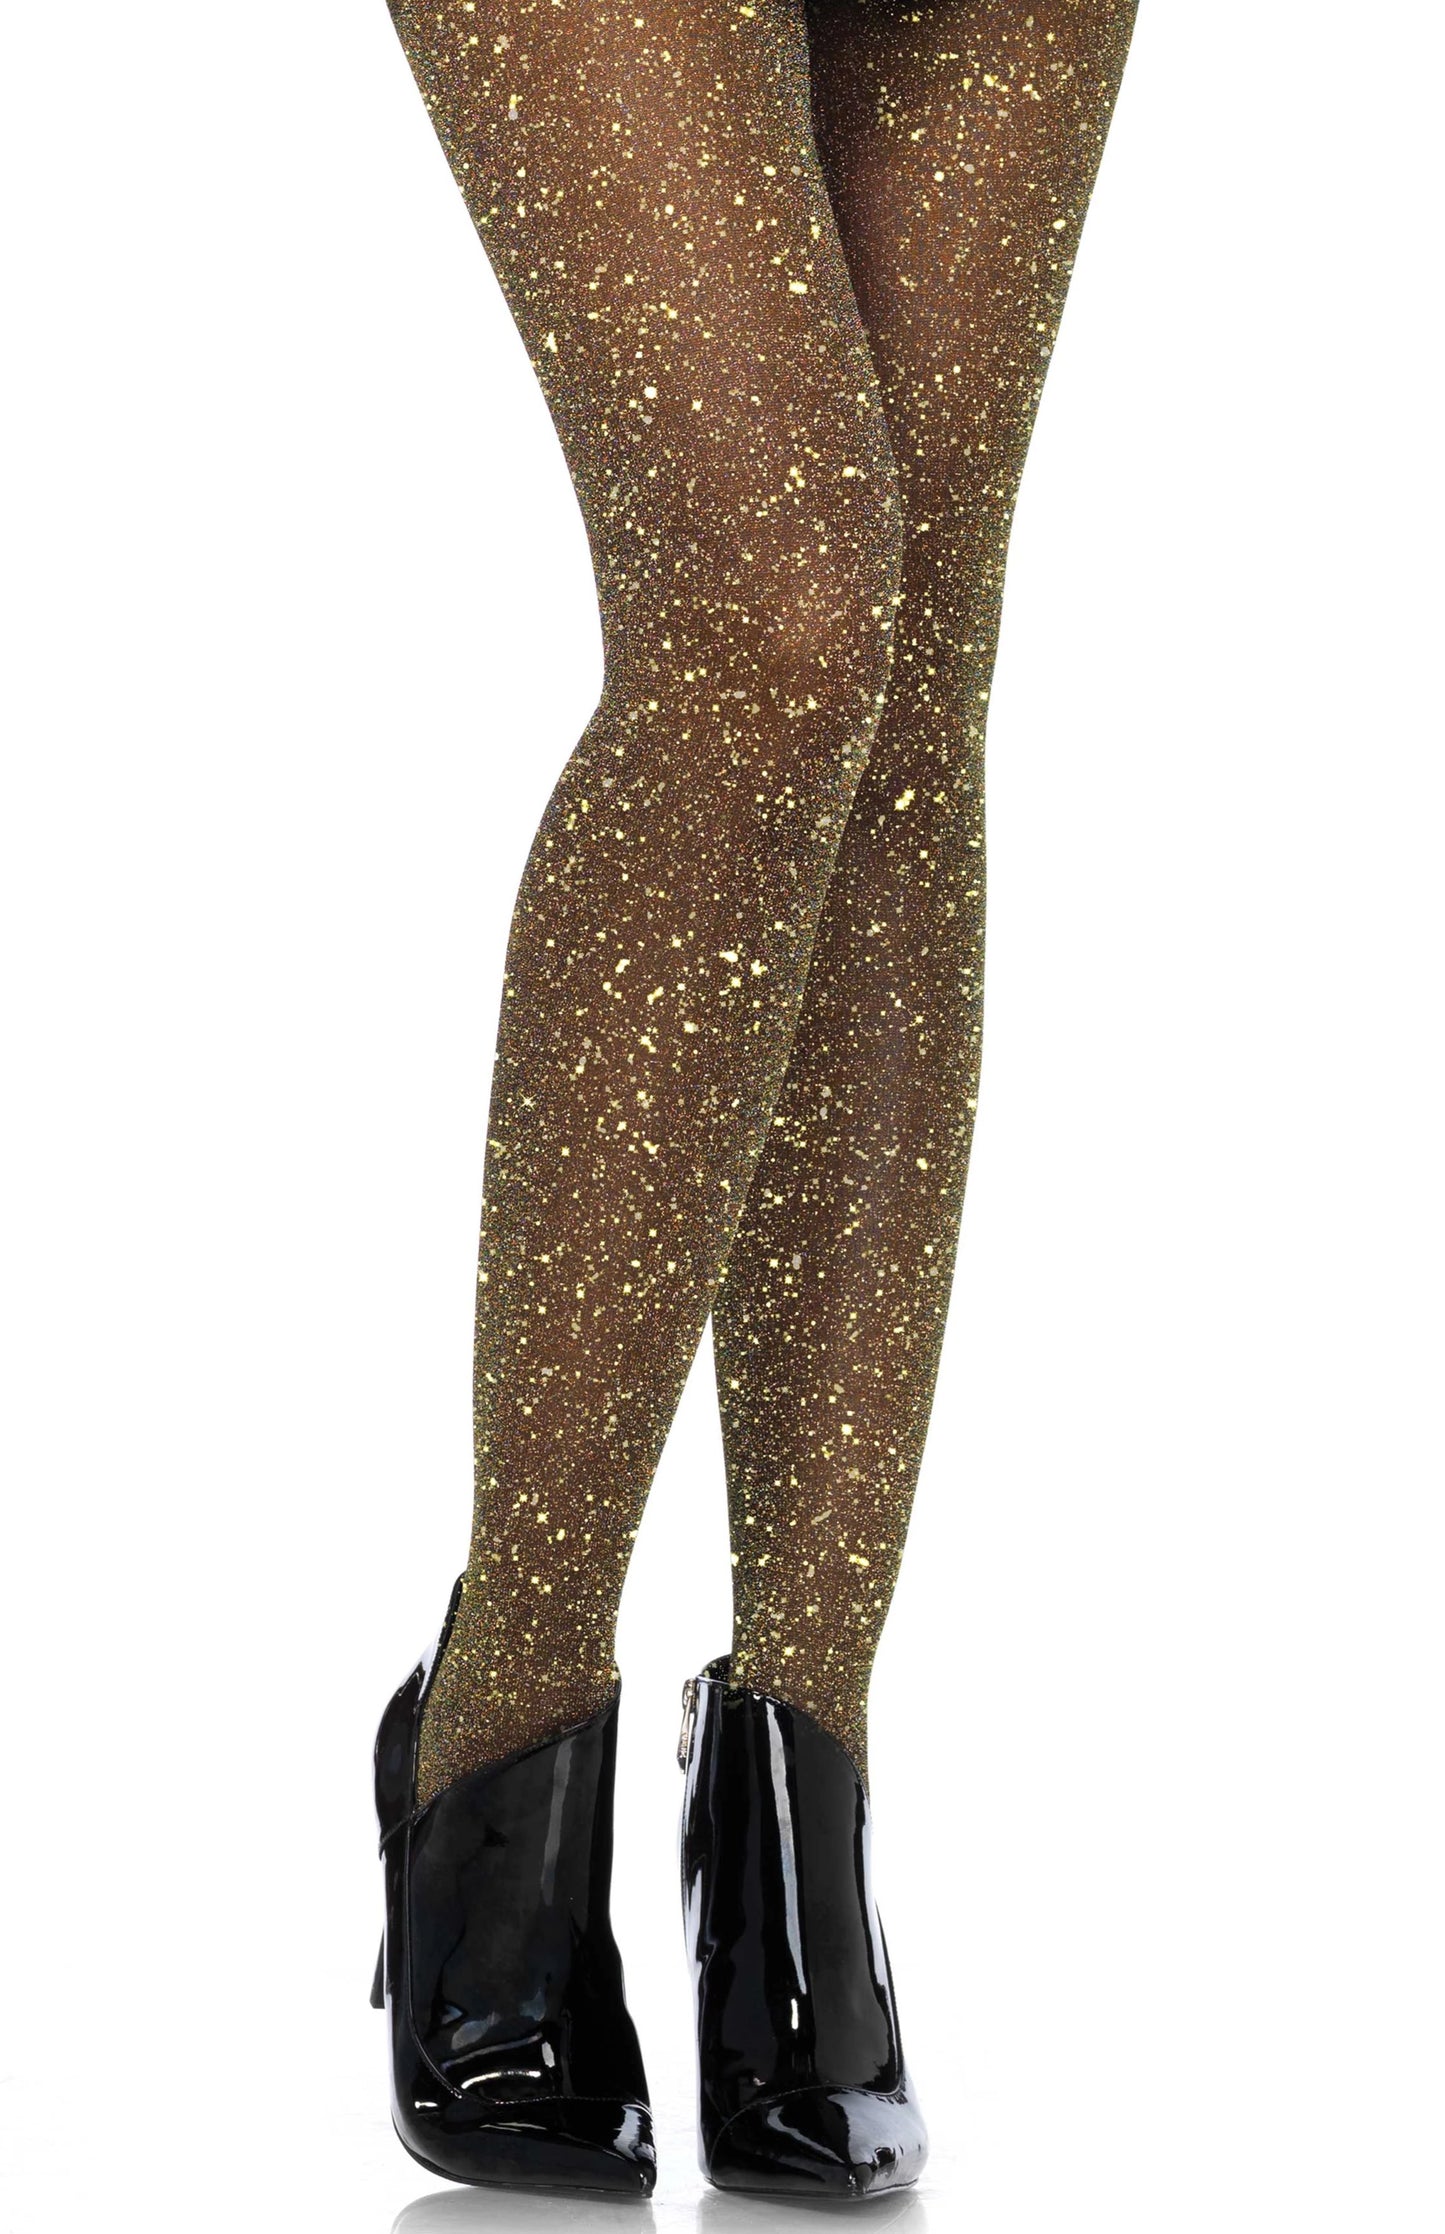 Leg Avenue 7130 Lurex sheer pantyhose - black and gold sparkly glitter tights